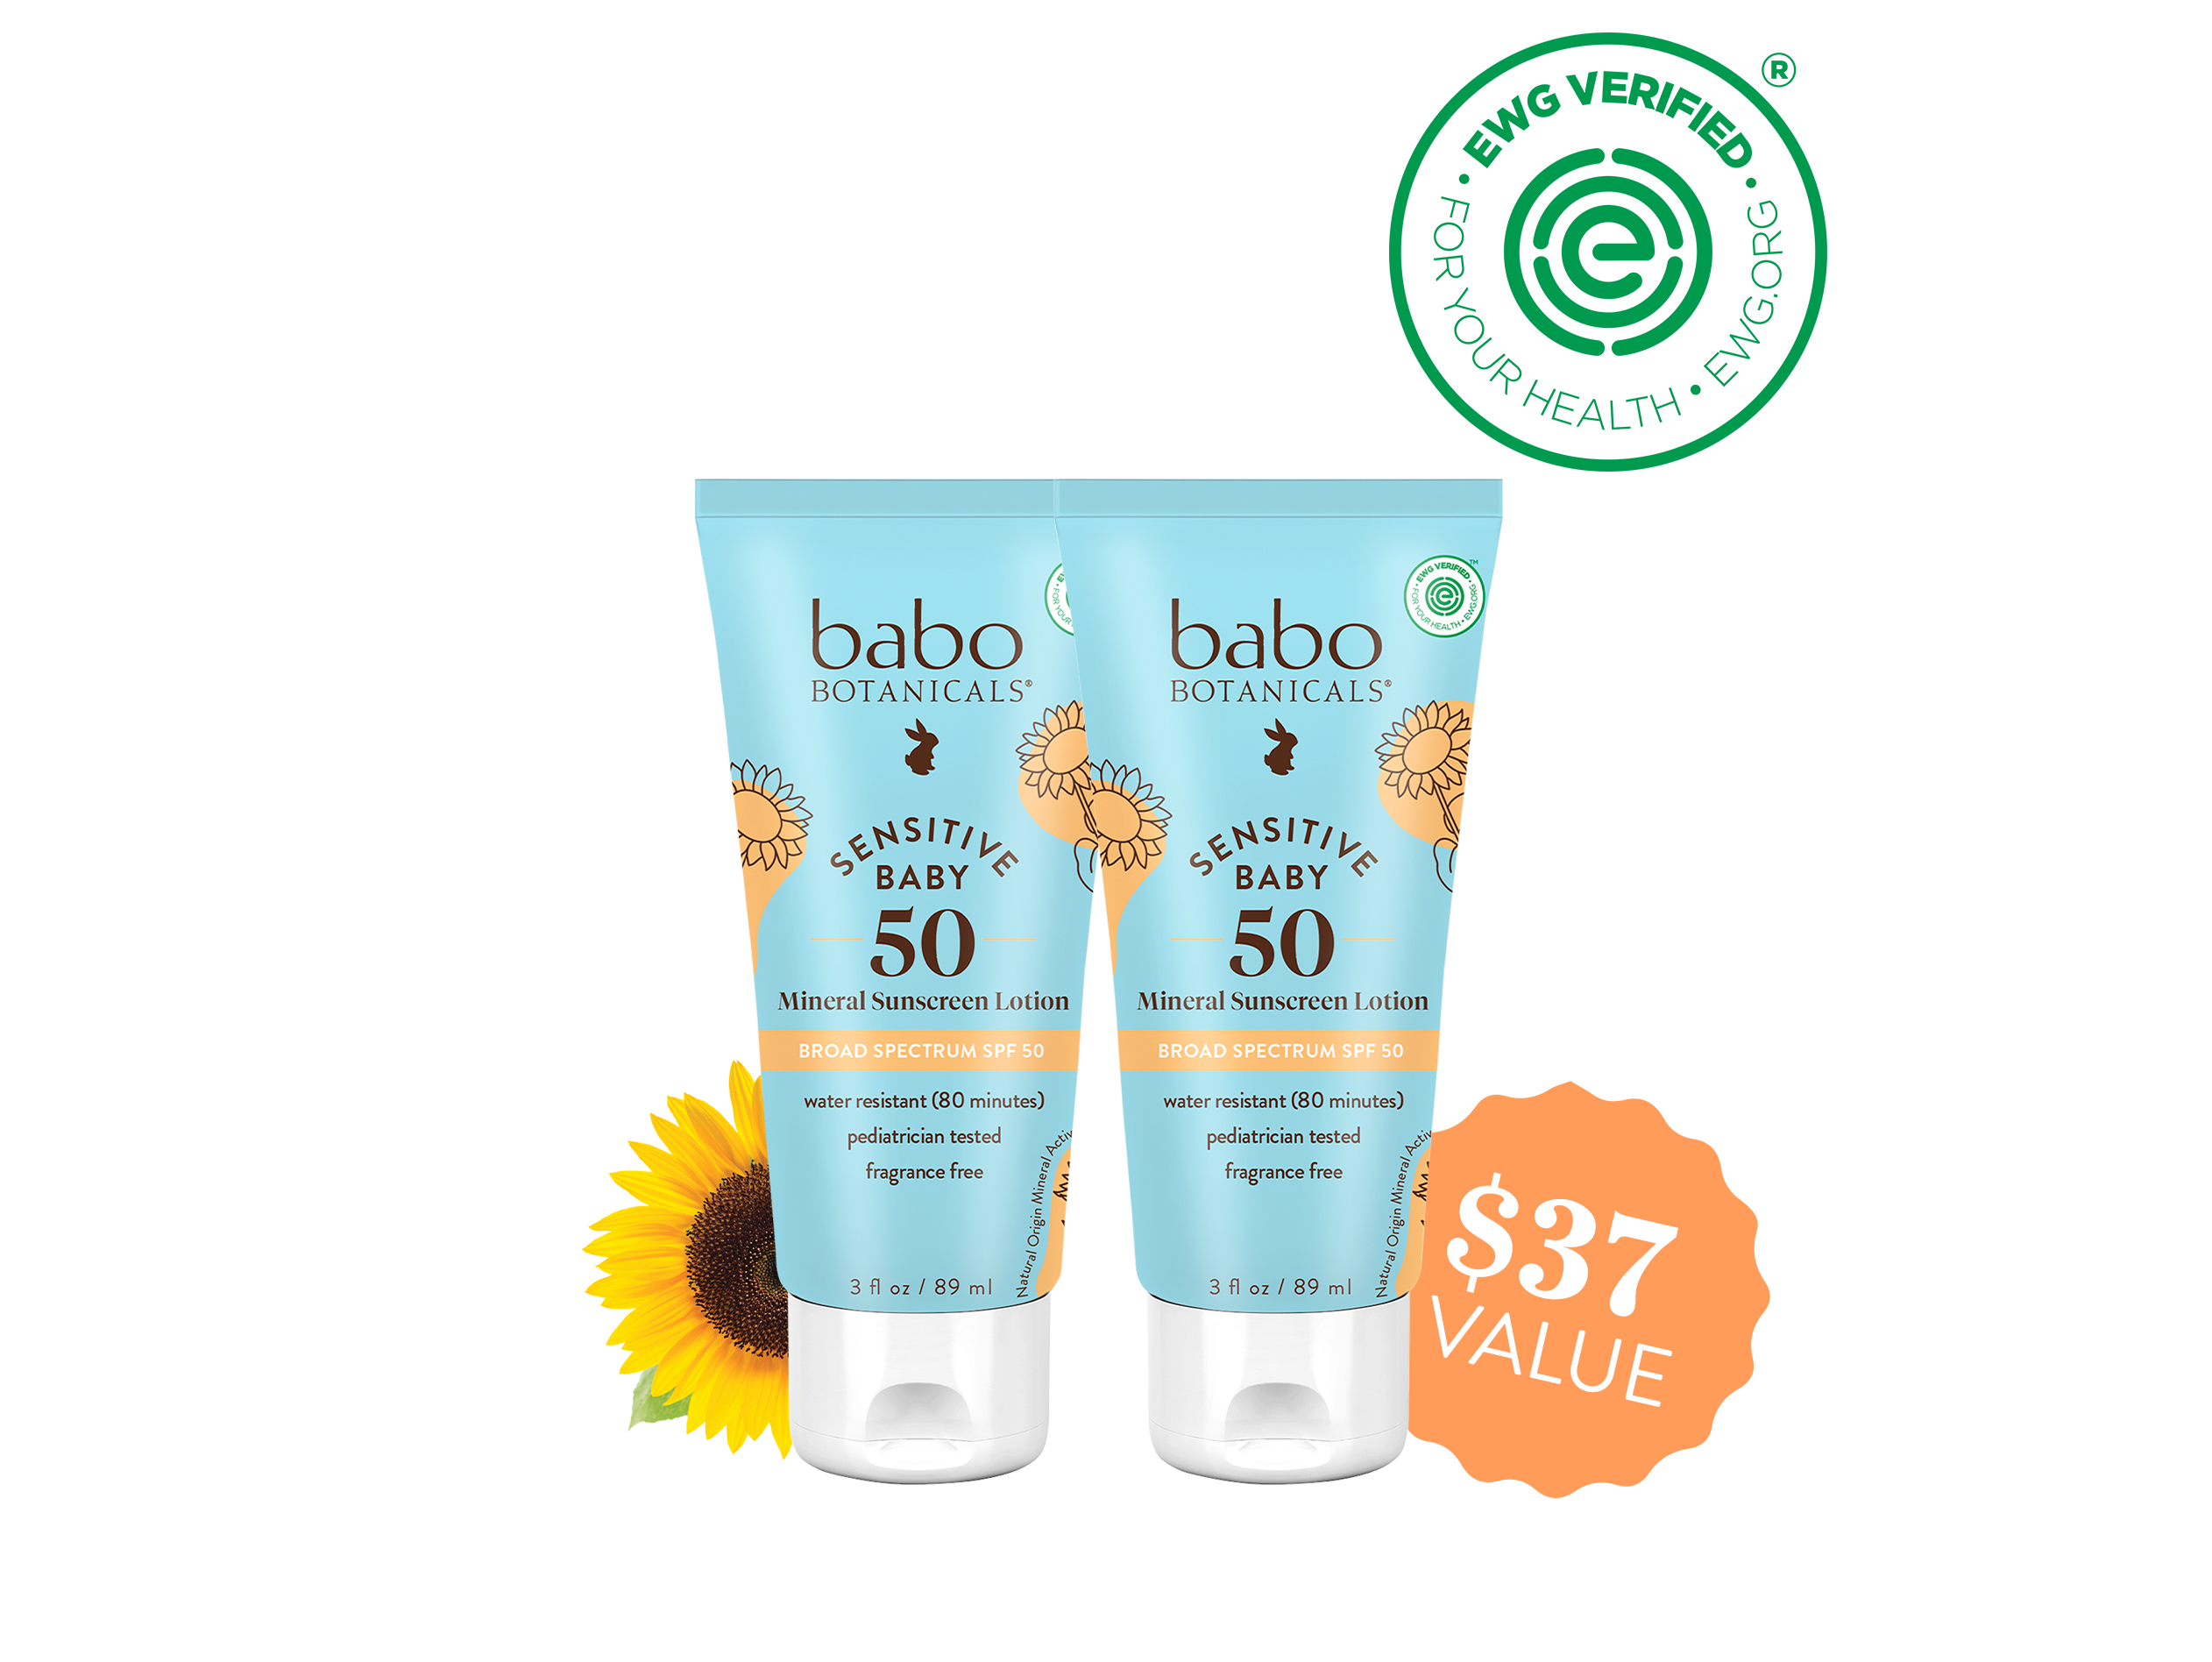 Babo Botanicals- Sensitive baby mineral sunscreen lotion spf50 duo- $37 value